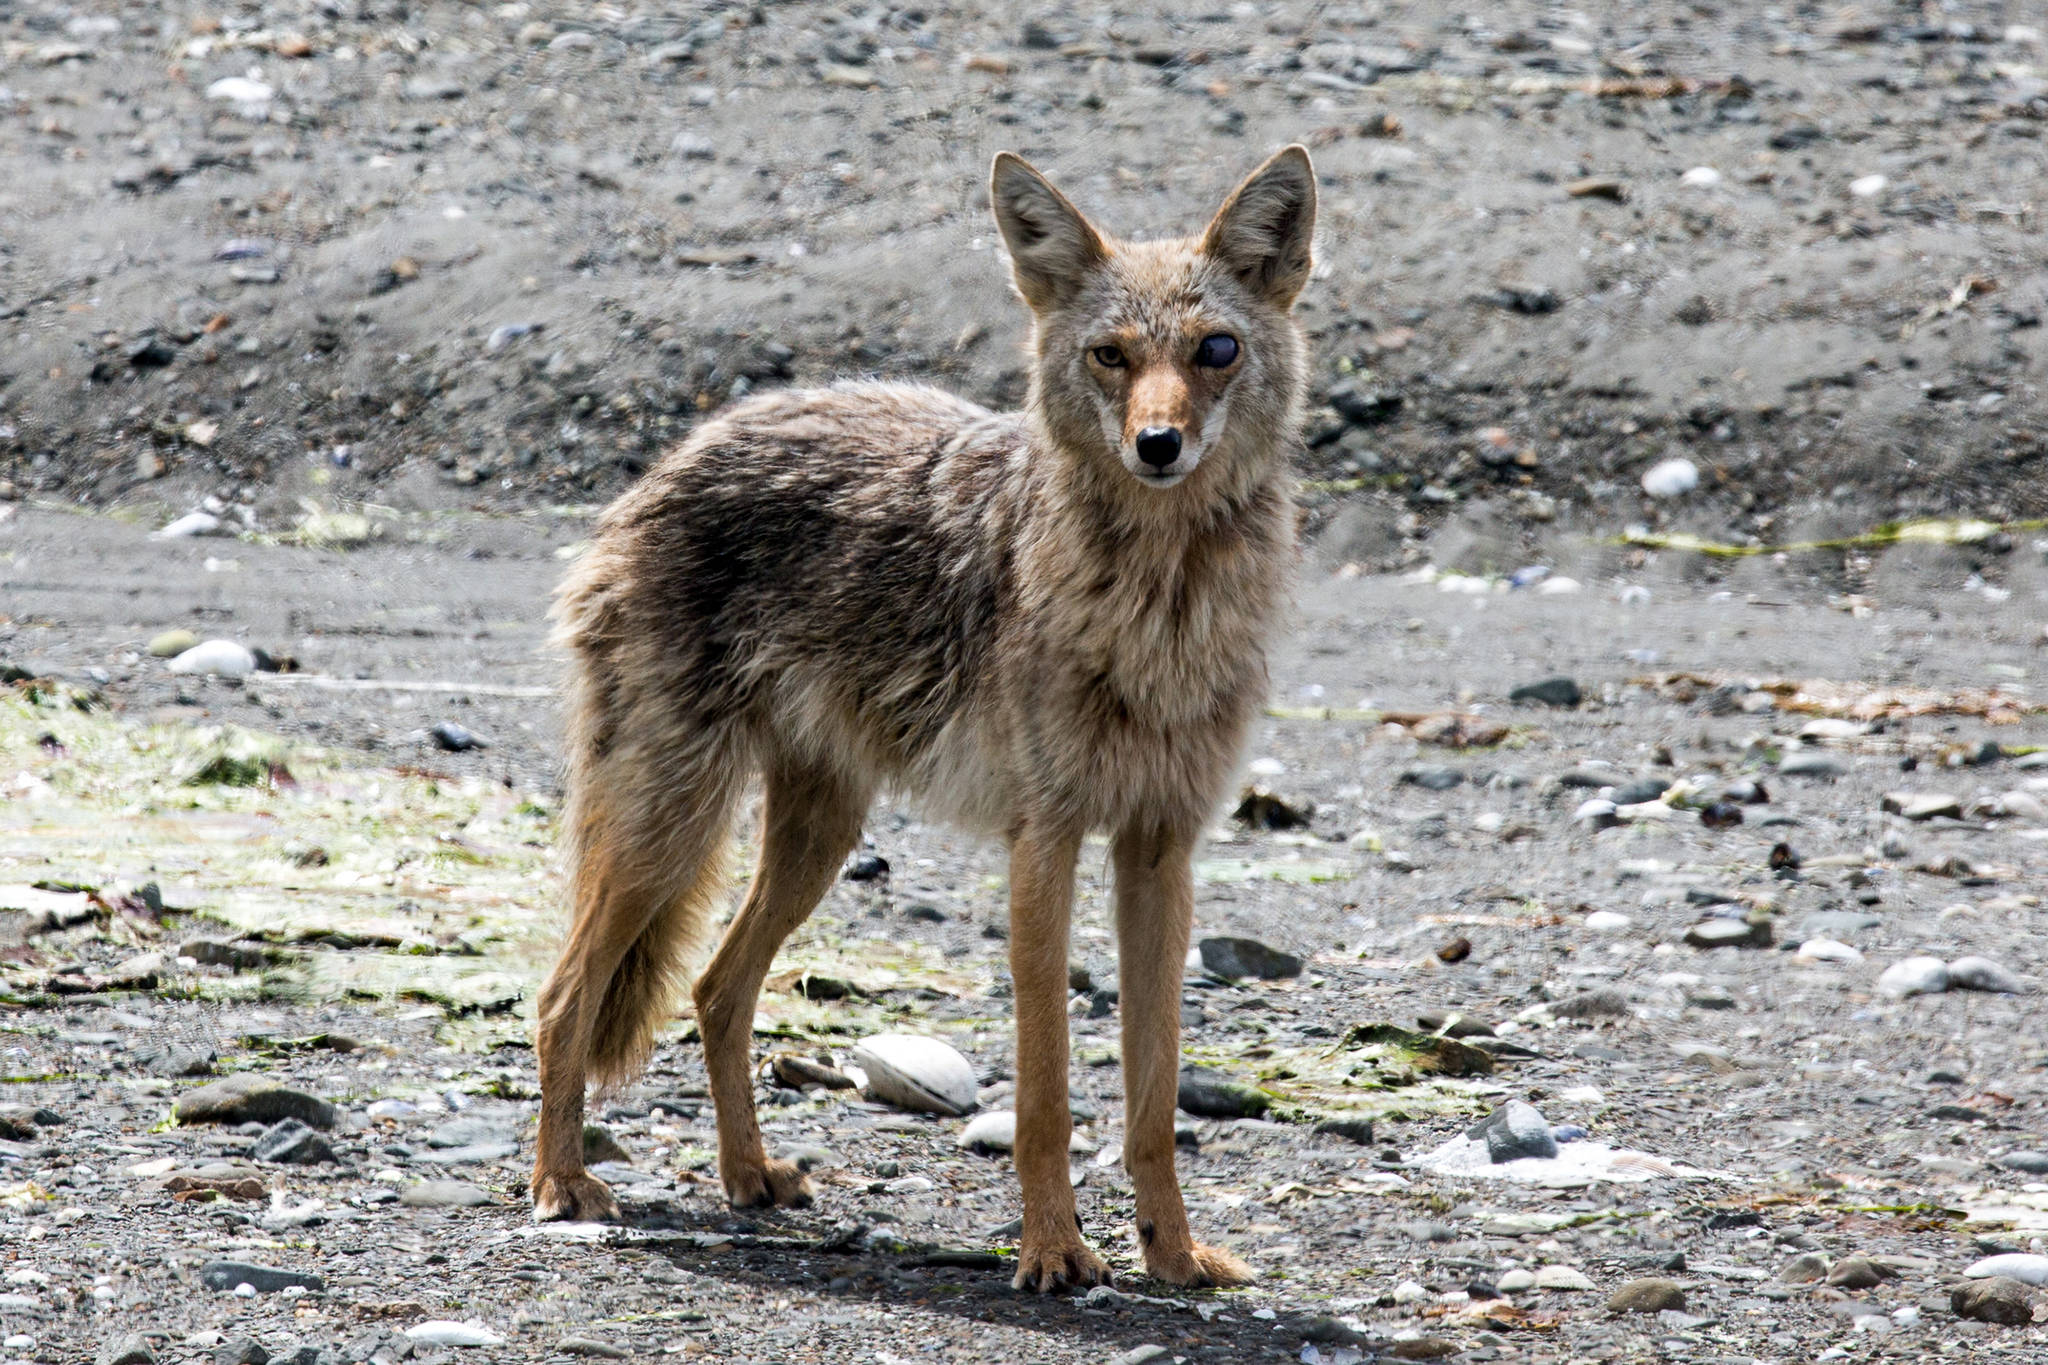 A coyote is seen on a beach near Excursion Inlet on June 8, 2019. The eye trauma may have been the result of a tangle with a porcupine, the photographer guessed. (Courtesy Photo | Jack Beedle)